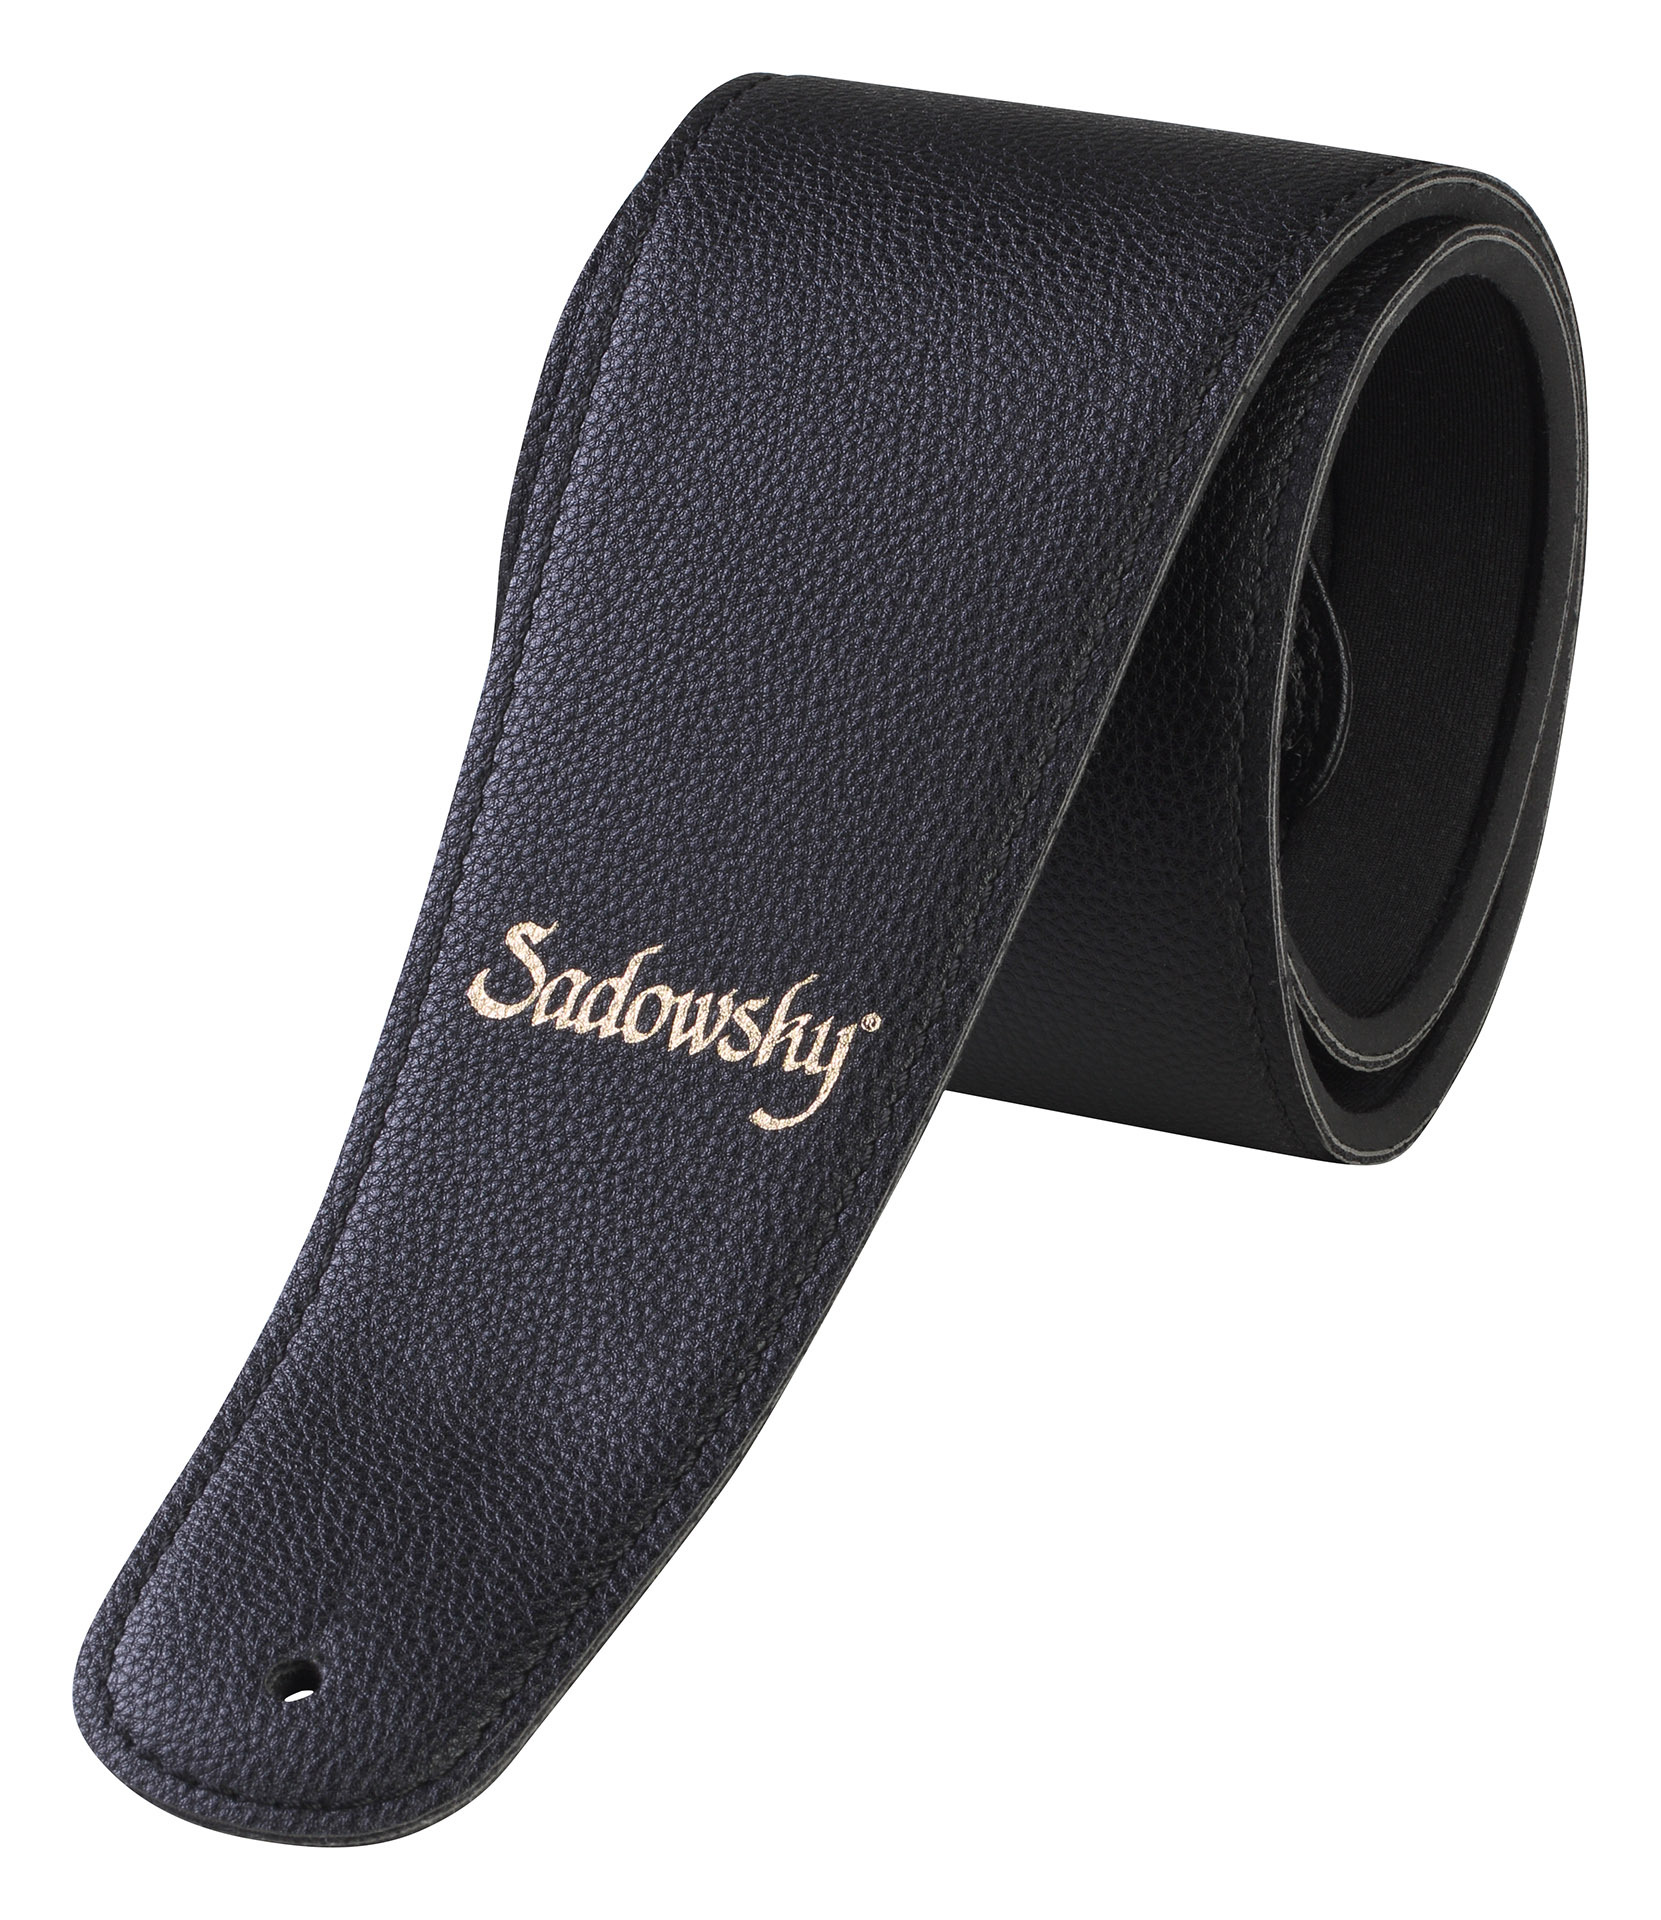 Sadowsky Synthetic Leather Bass Strap with Neoprene Padding - Black, Gold Embossing